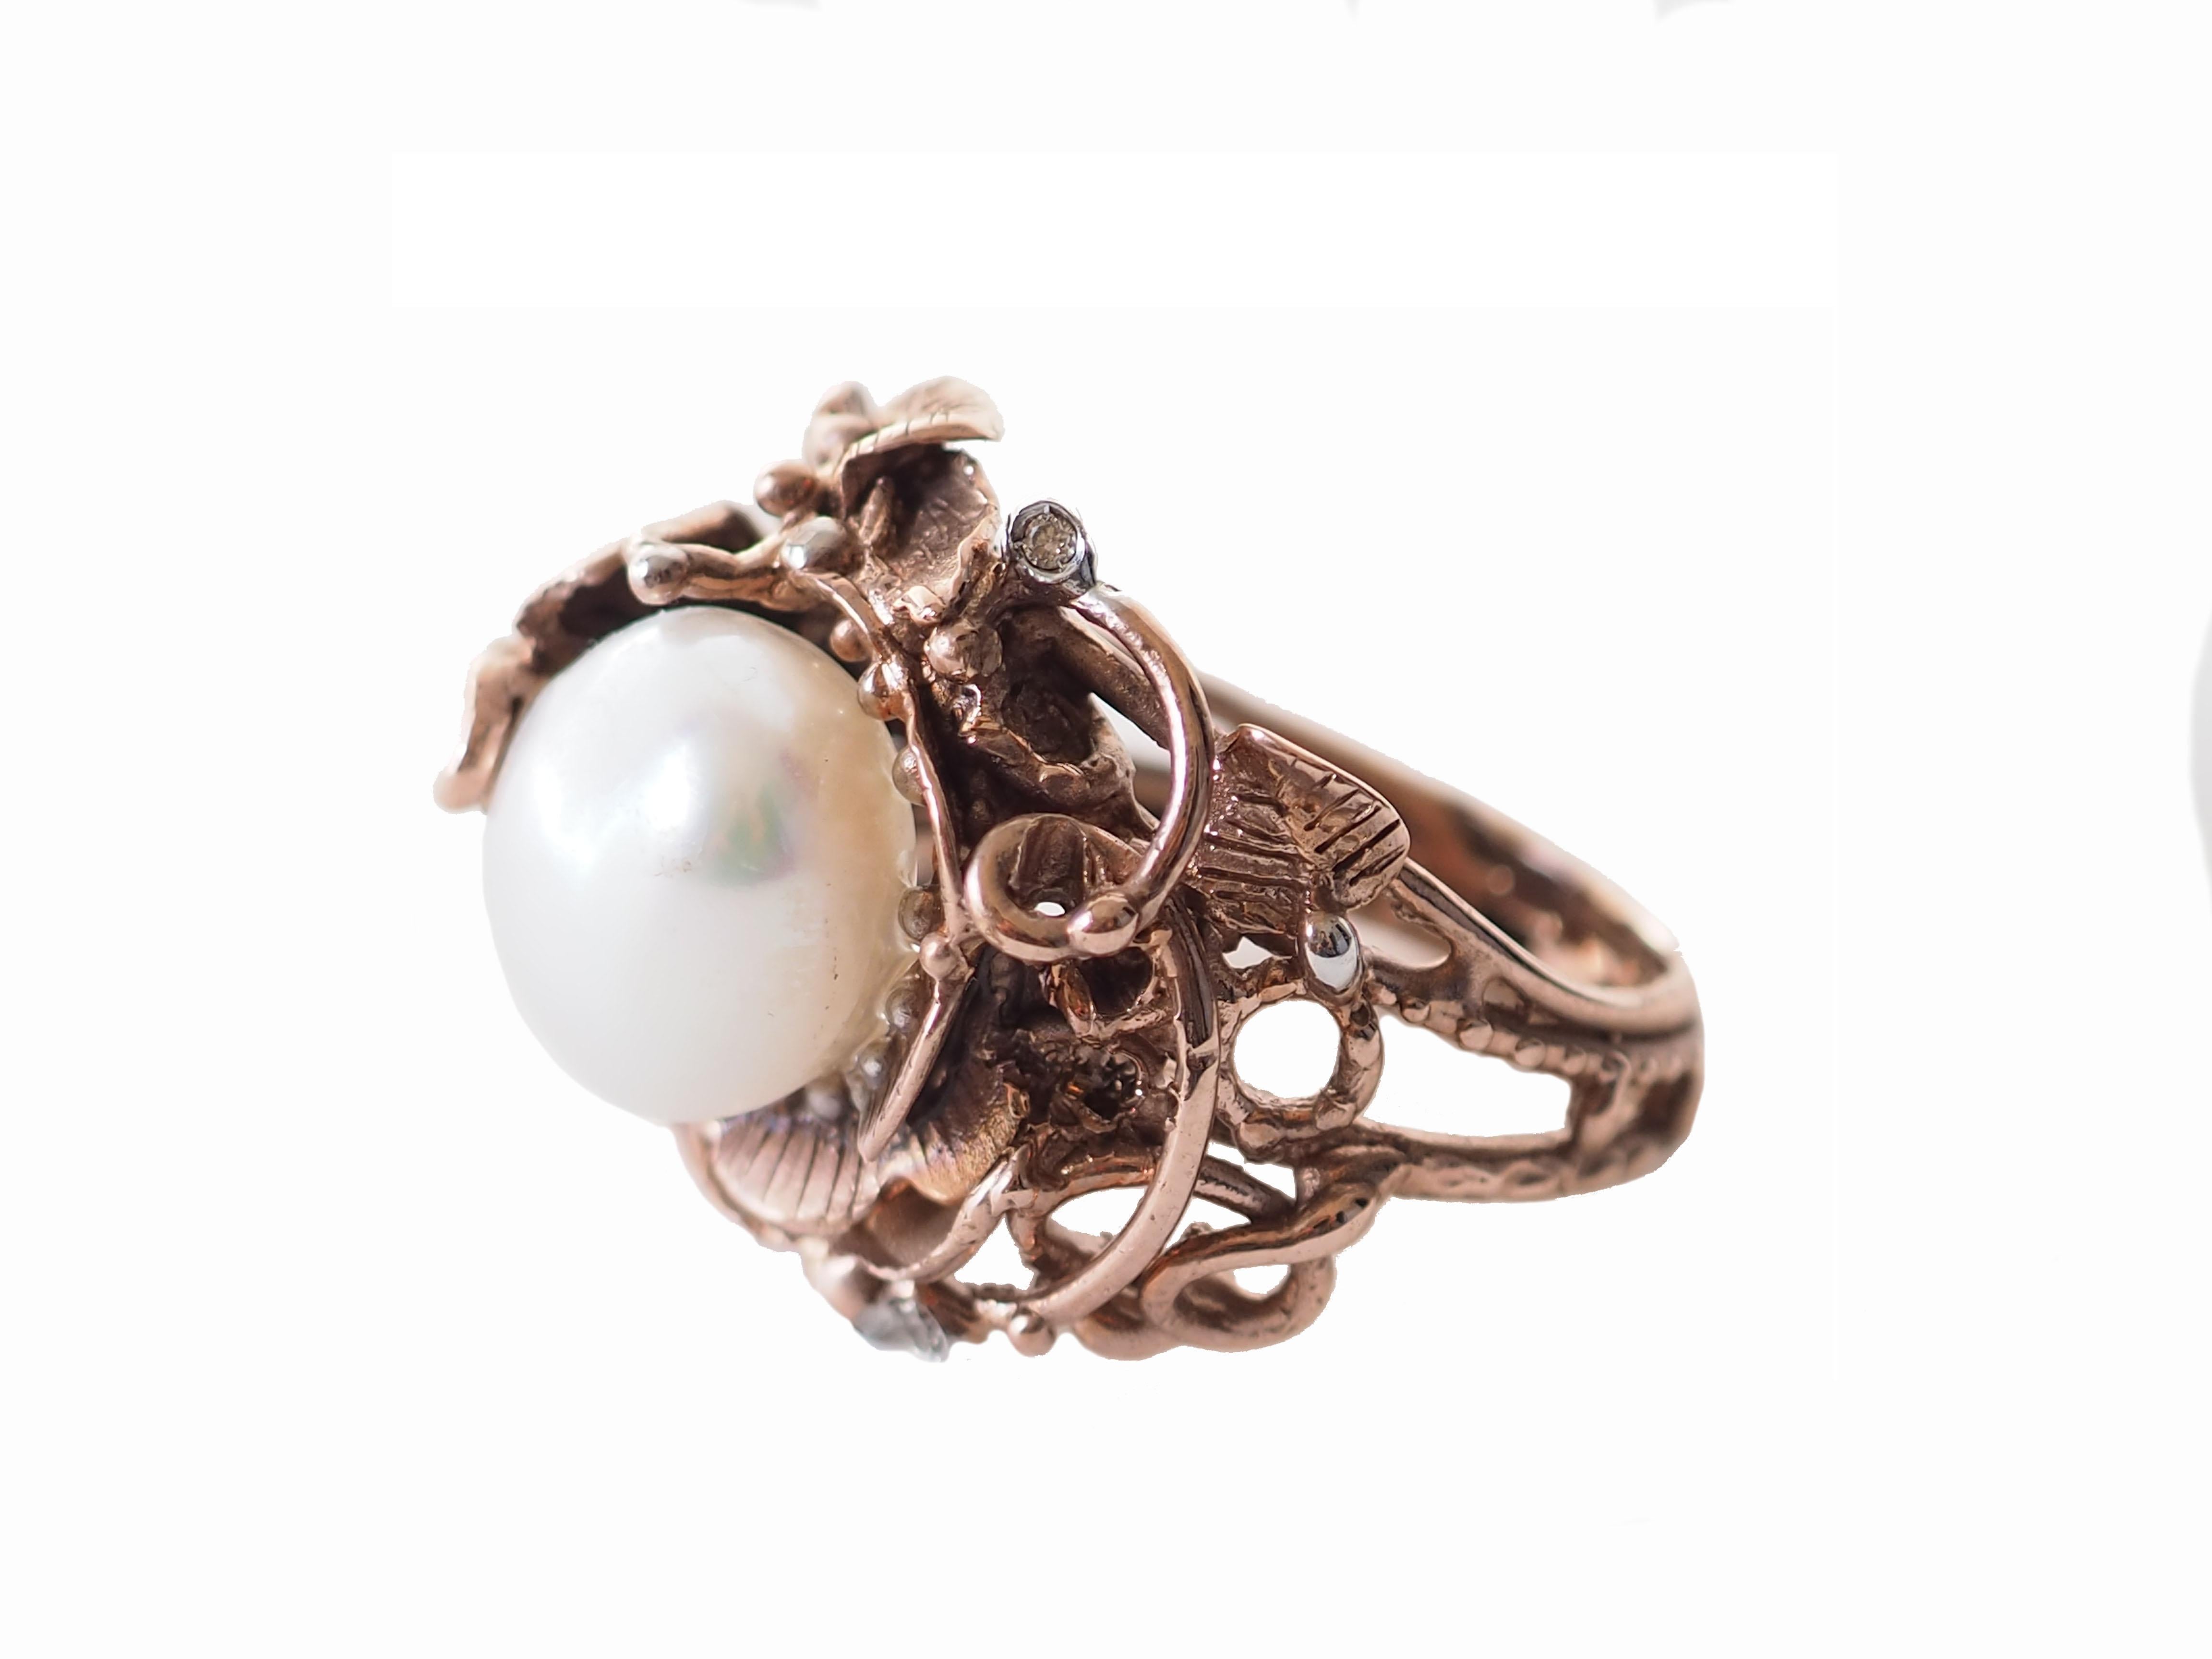 Diamond ctg 0,70 Bronze Natural Pearl Ring. Size 14 eu.
All Giulia Colussi jewelry is new and has never been previously owned or worn. Each item will arrive at your door beautifully gift wrapped in our boxes, put inside an elegant pouch or jewel